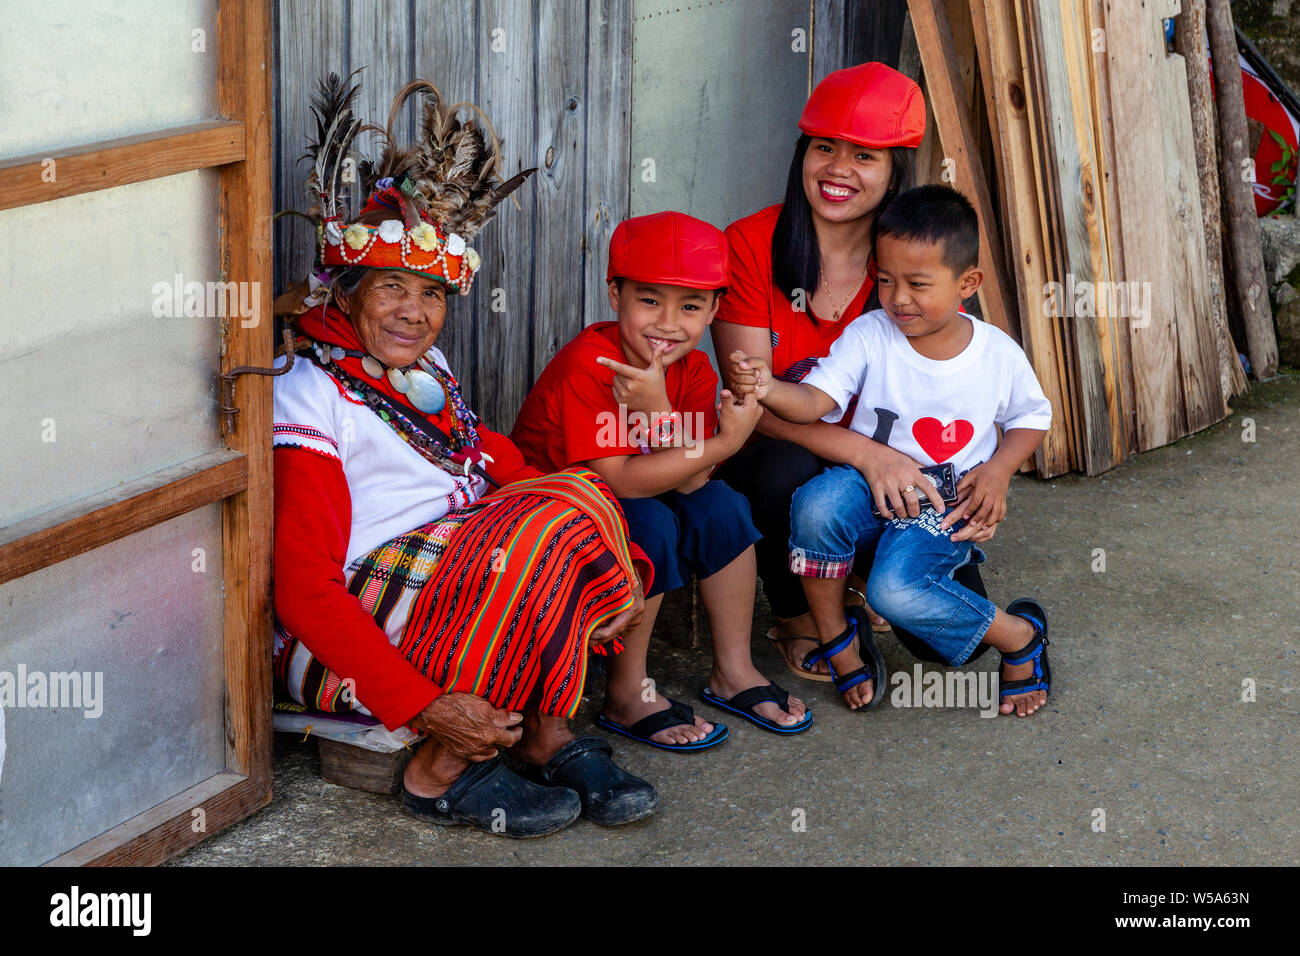 A Filipino Family Pose With An Ifugao Tribal Woman, Banaue, Luzon, The philippines Stock Photo